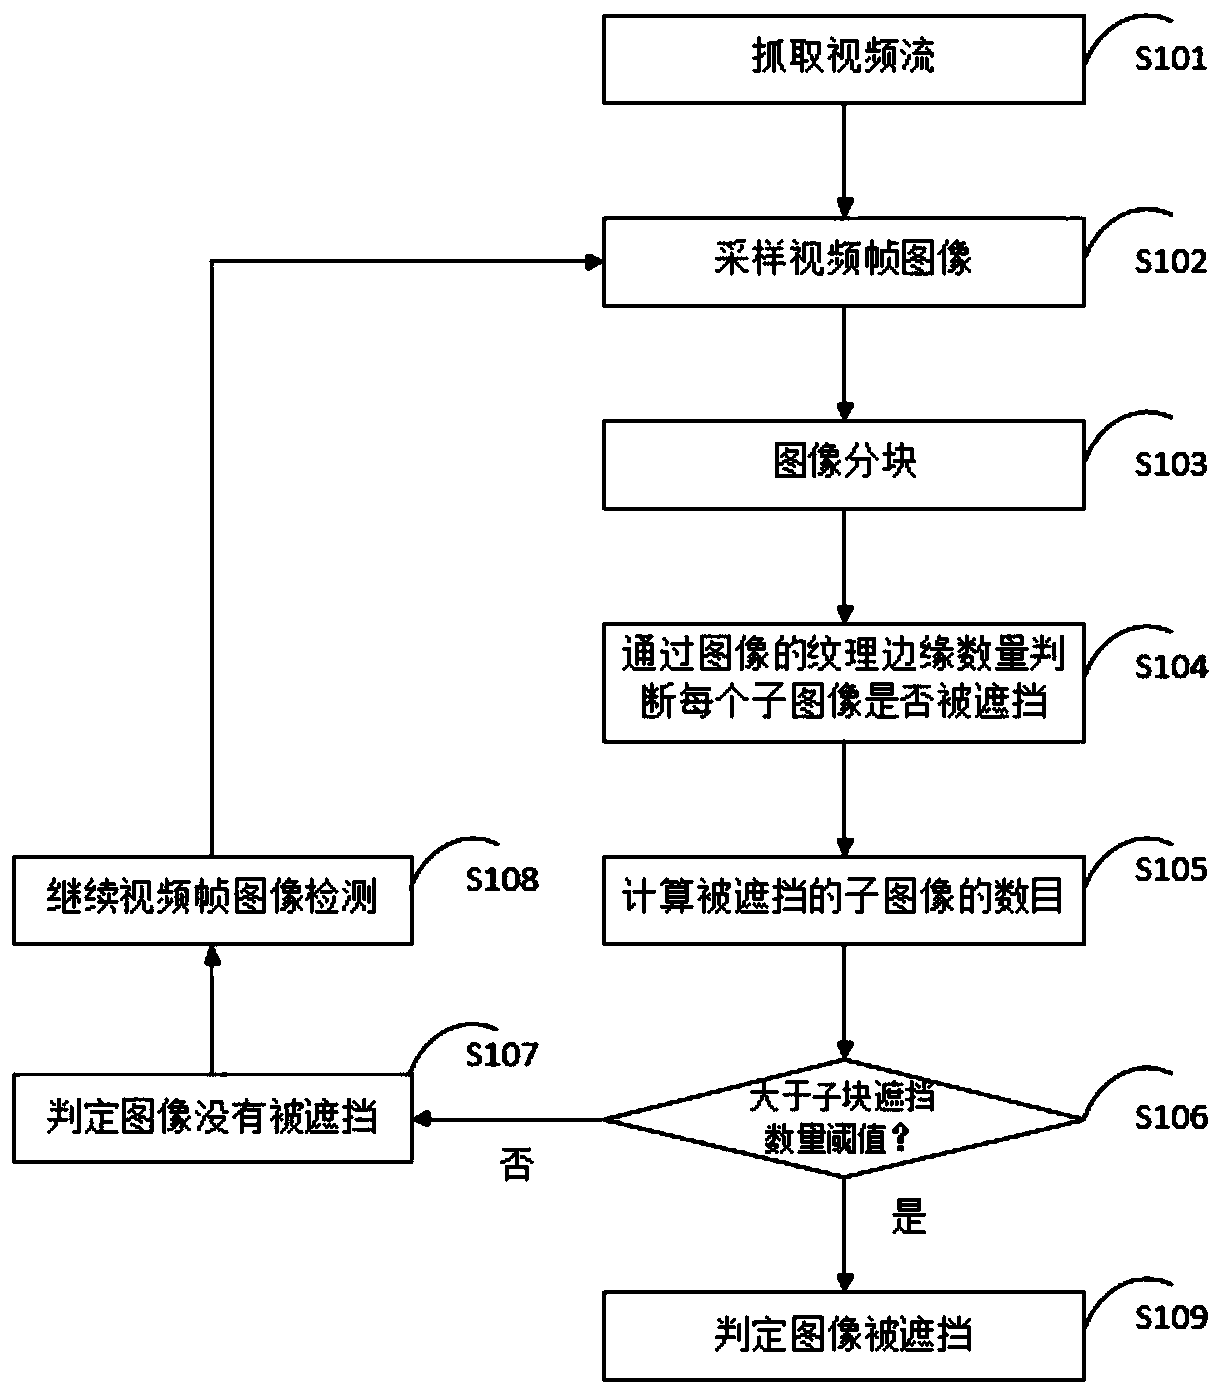 Video occlusion detection method for automobile data recorder